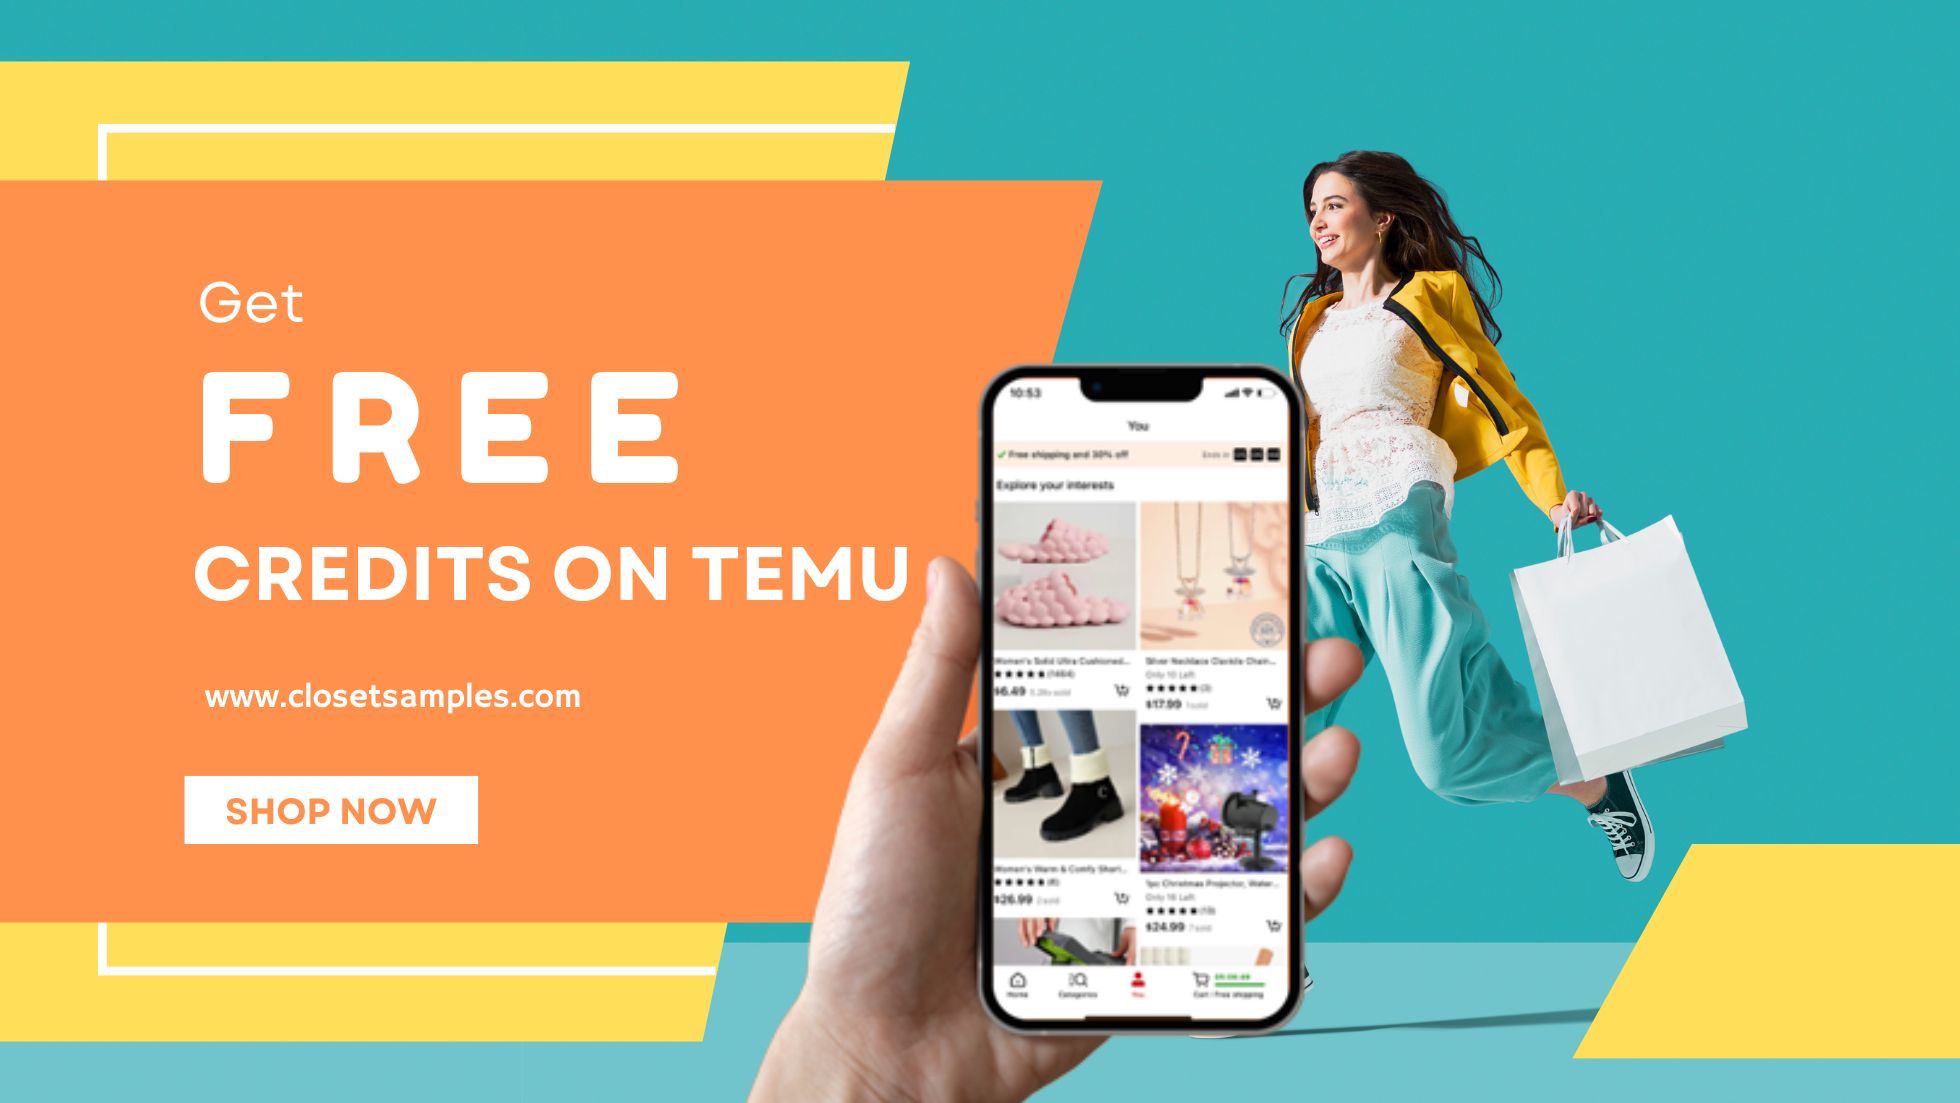 Get FREE Credits on the Temu A...